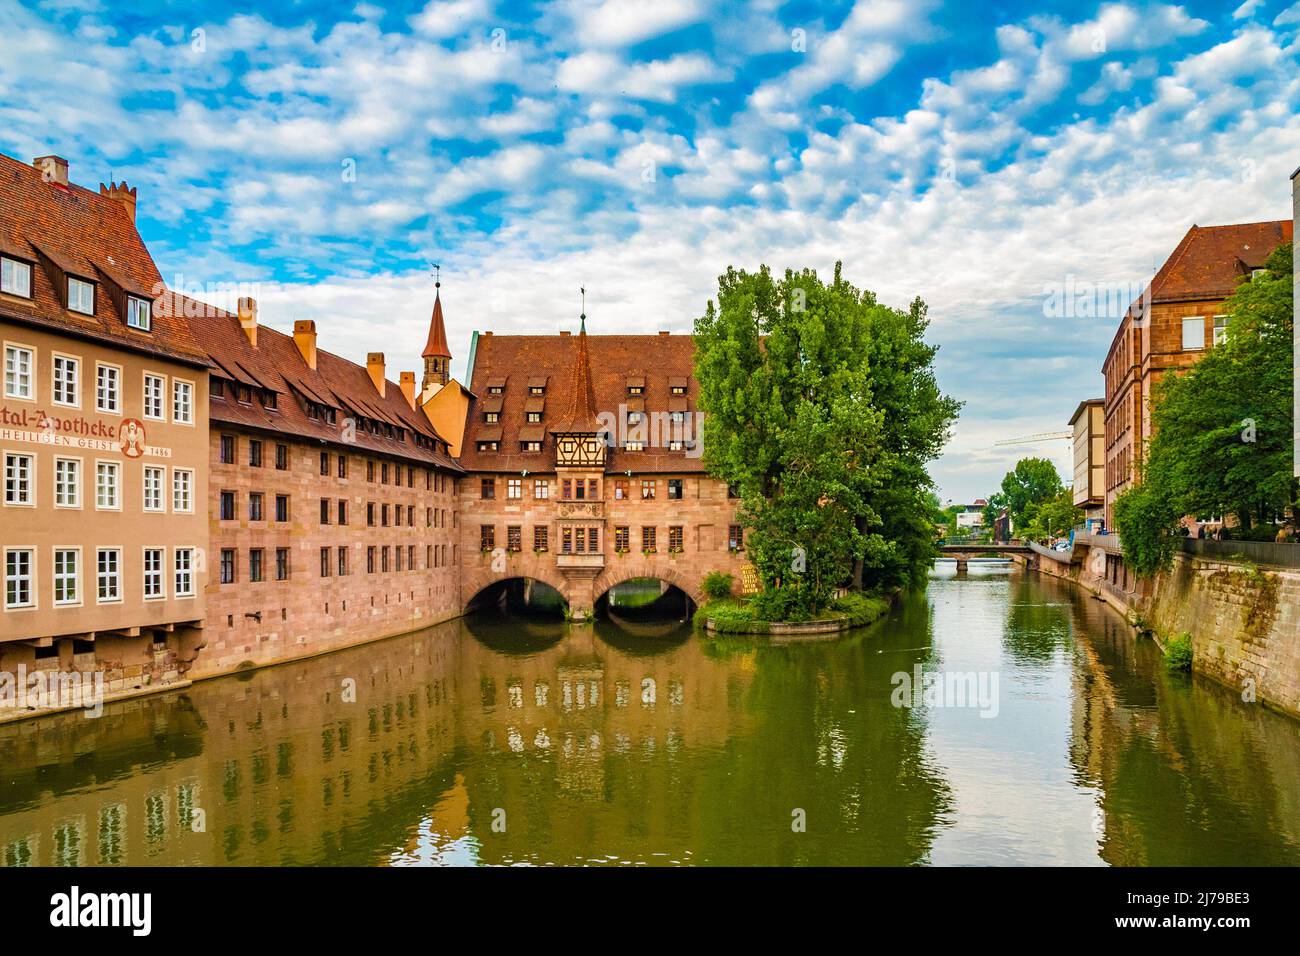 Lovely panoramic view of the Heilig-Geist-Spital (Holy Spirit Hospital) from the west, partly built over the Pegnitz river in Nürnberg, Germany. It... Stock Photo